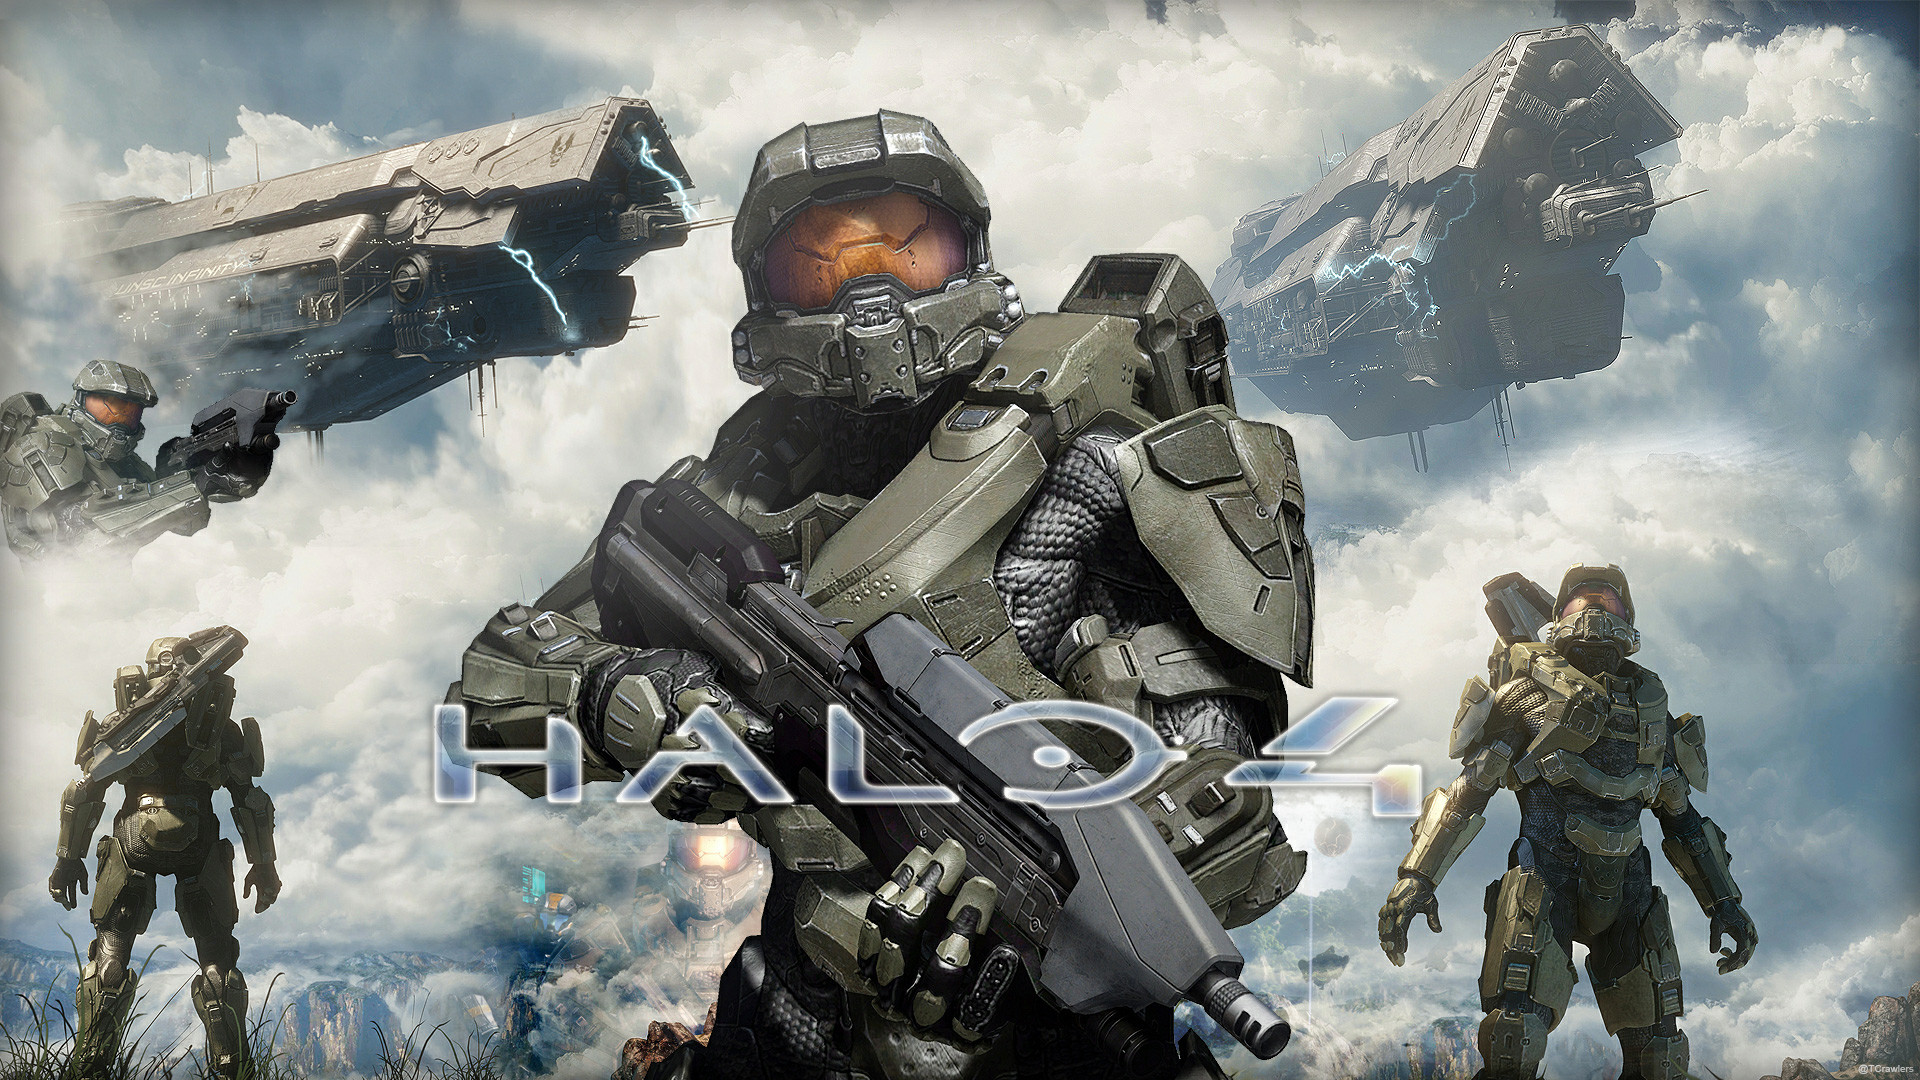 halo wallpaper,action adventure game,shooter game,soldier,strategy video game,pc game